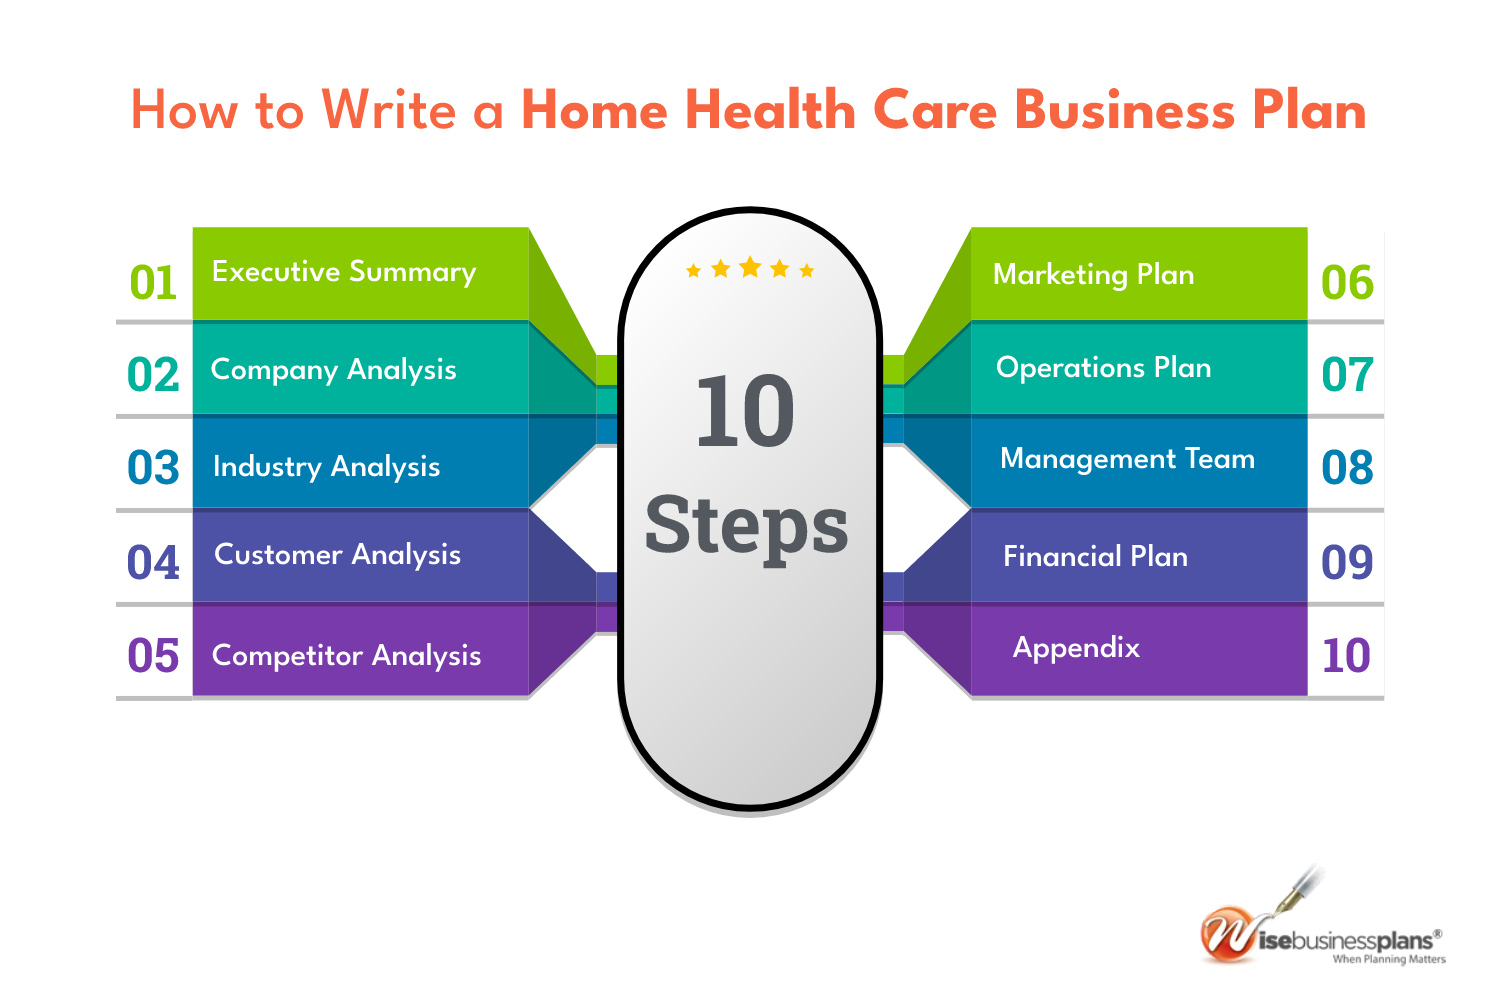 How to write a home health care business plan